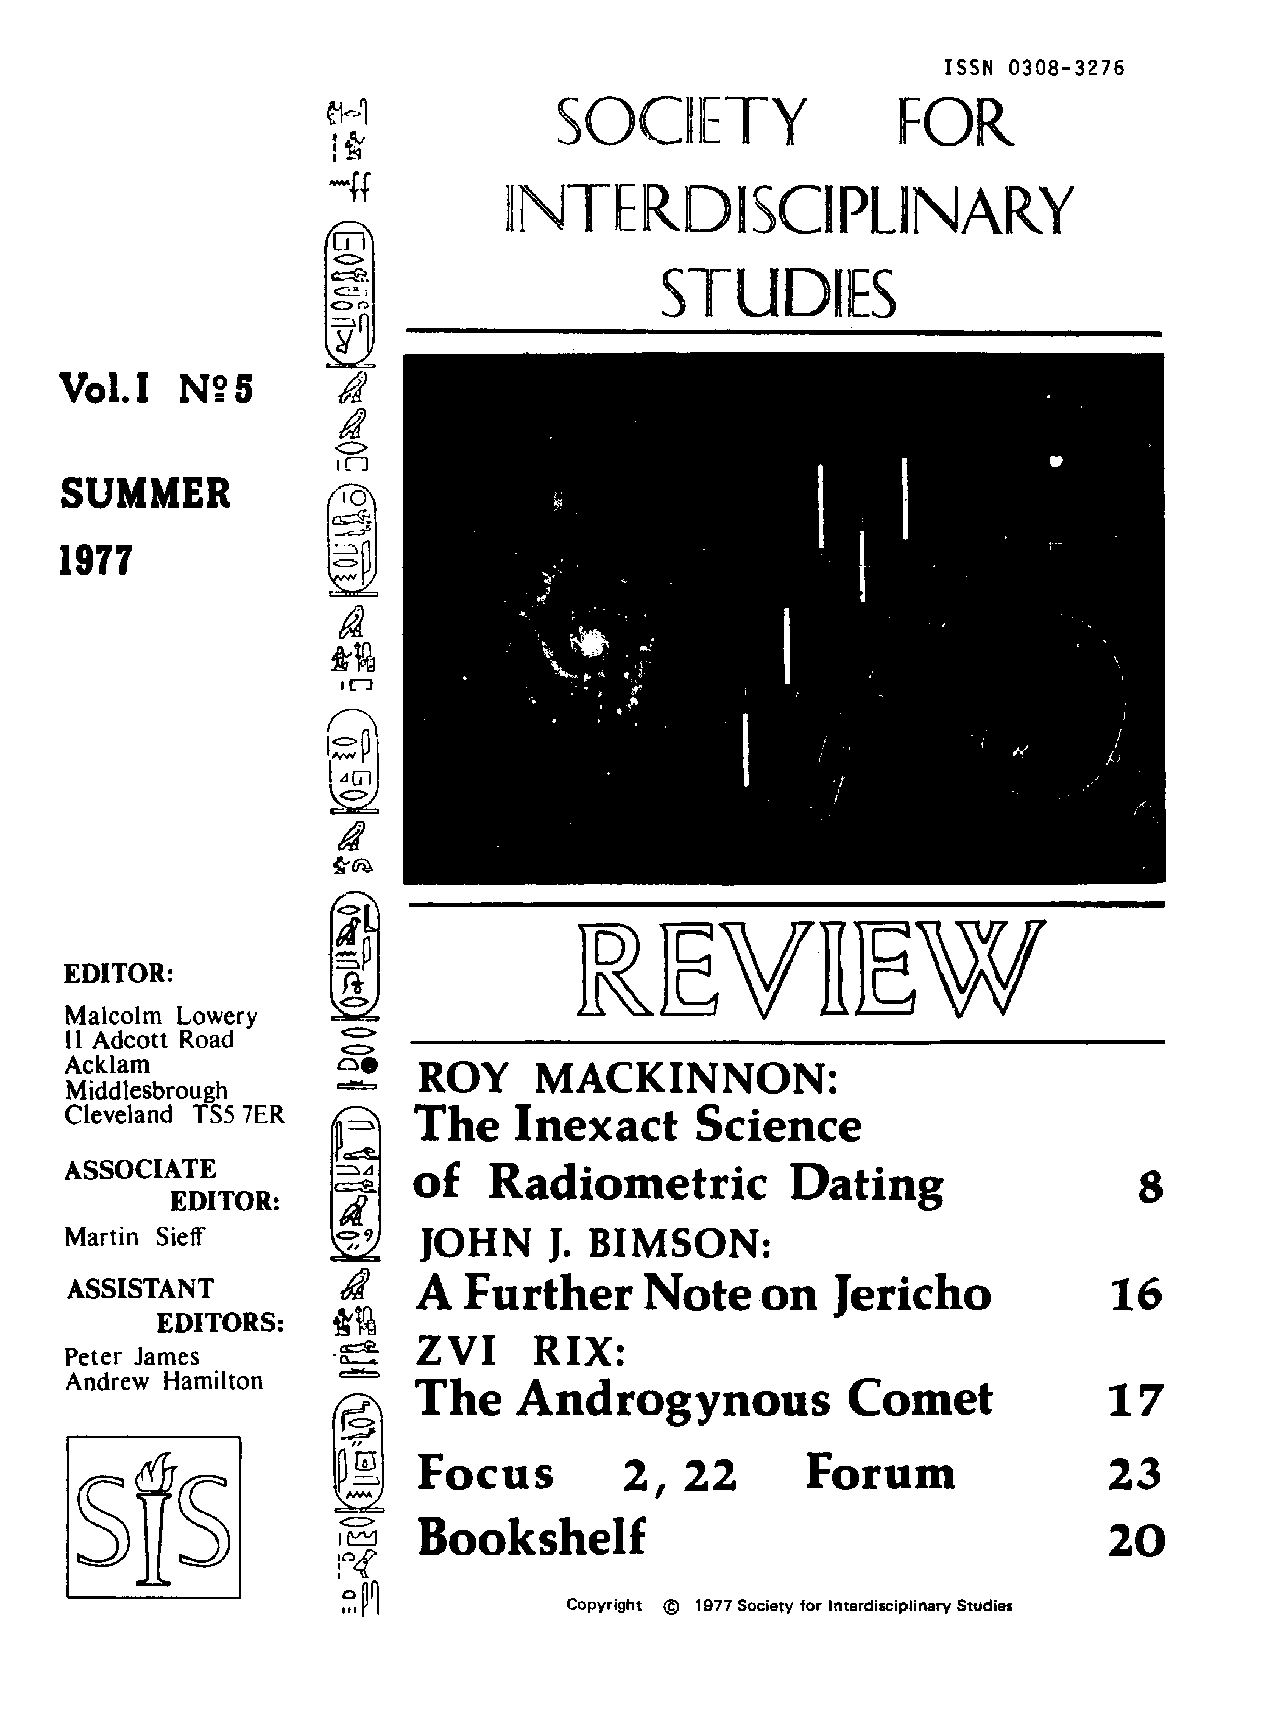 SIS Review 1977 v1 n5 cover